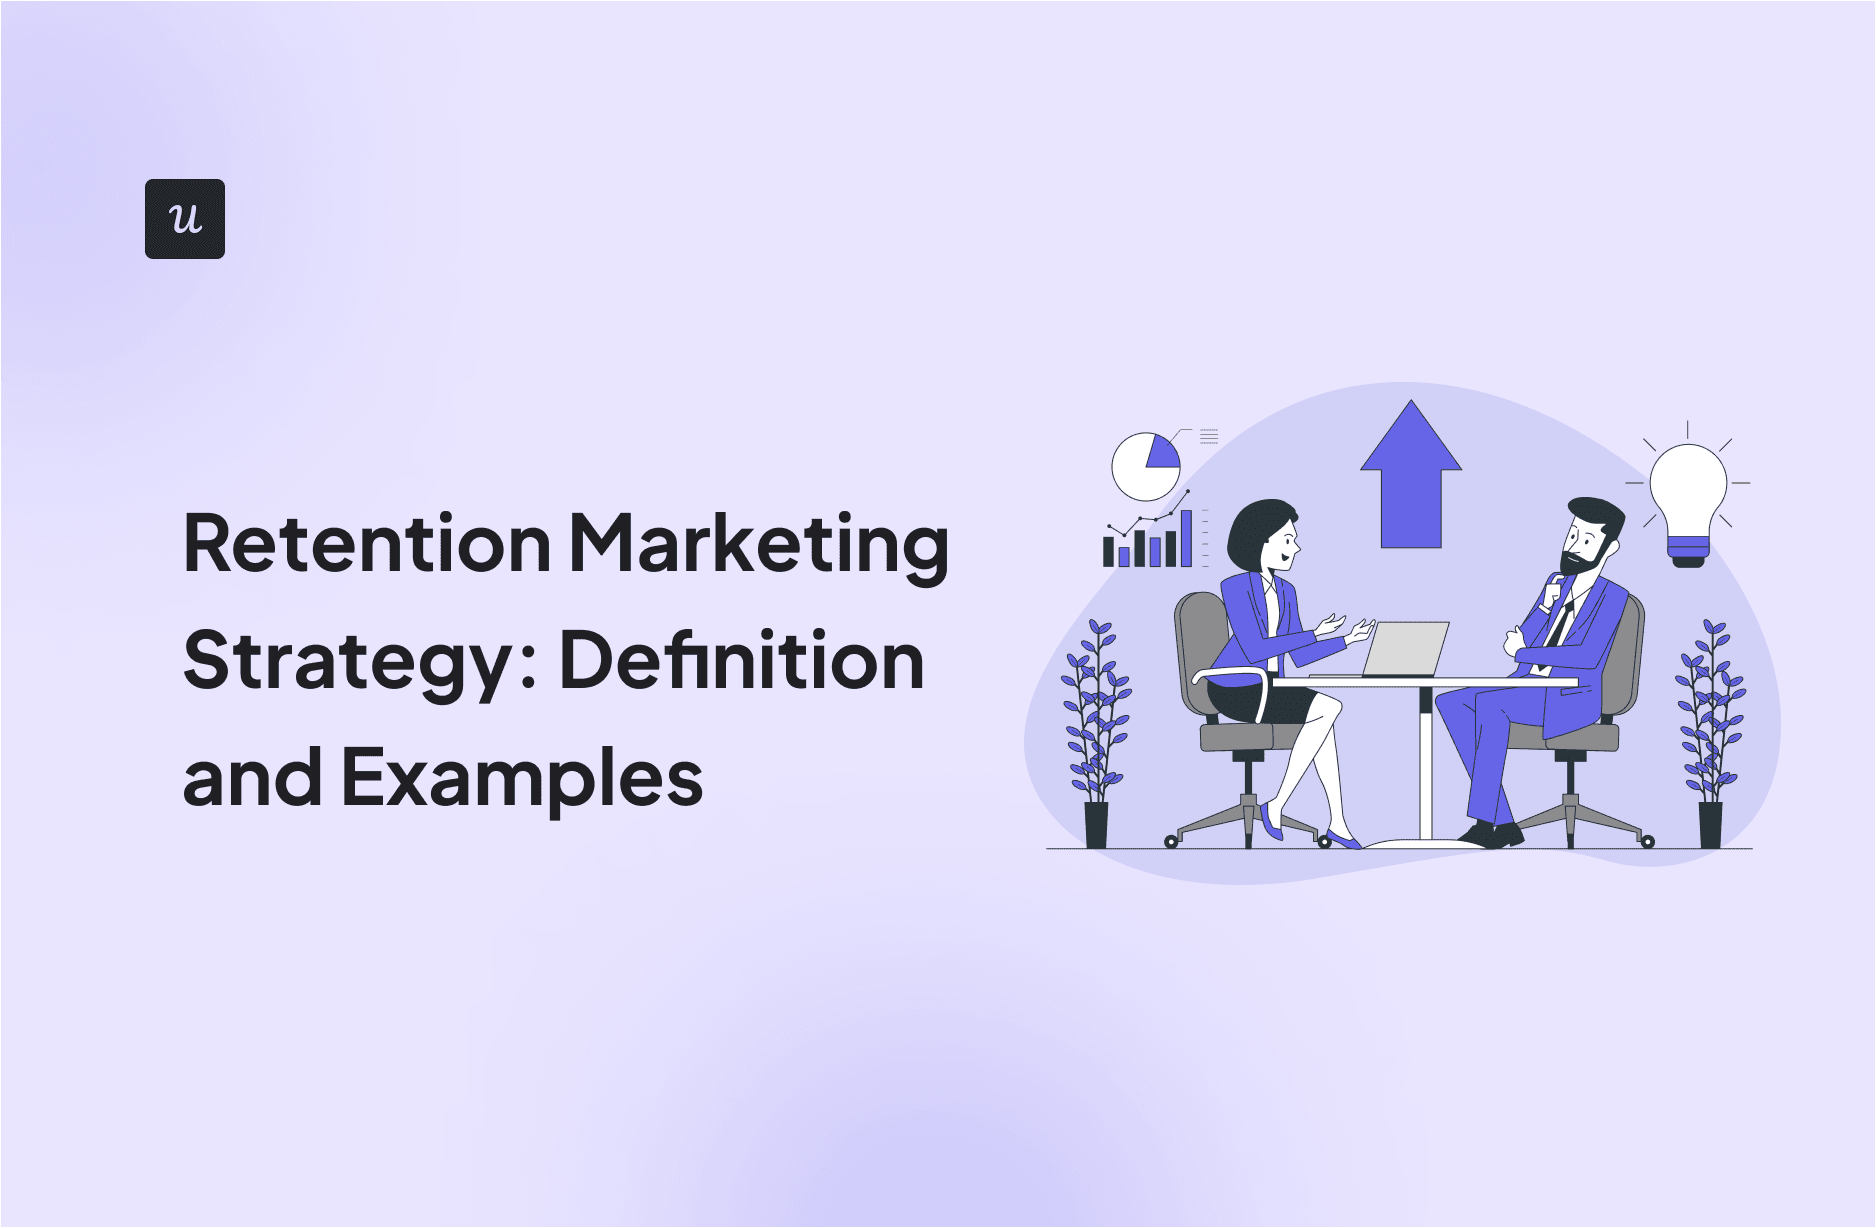 Retention Marketing Strategy: Definition and Examples cover